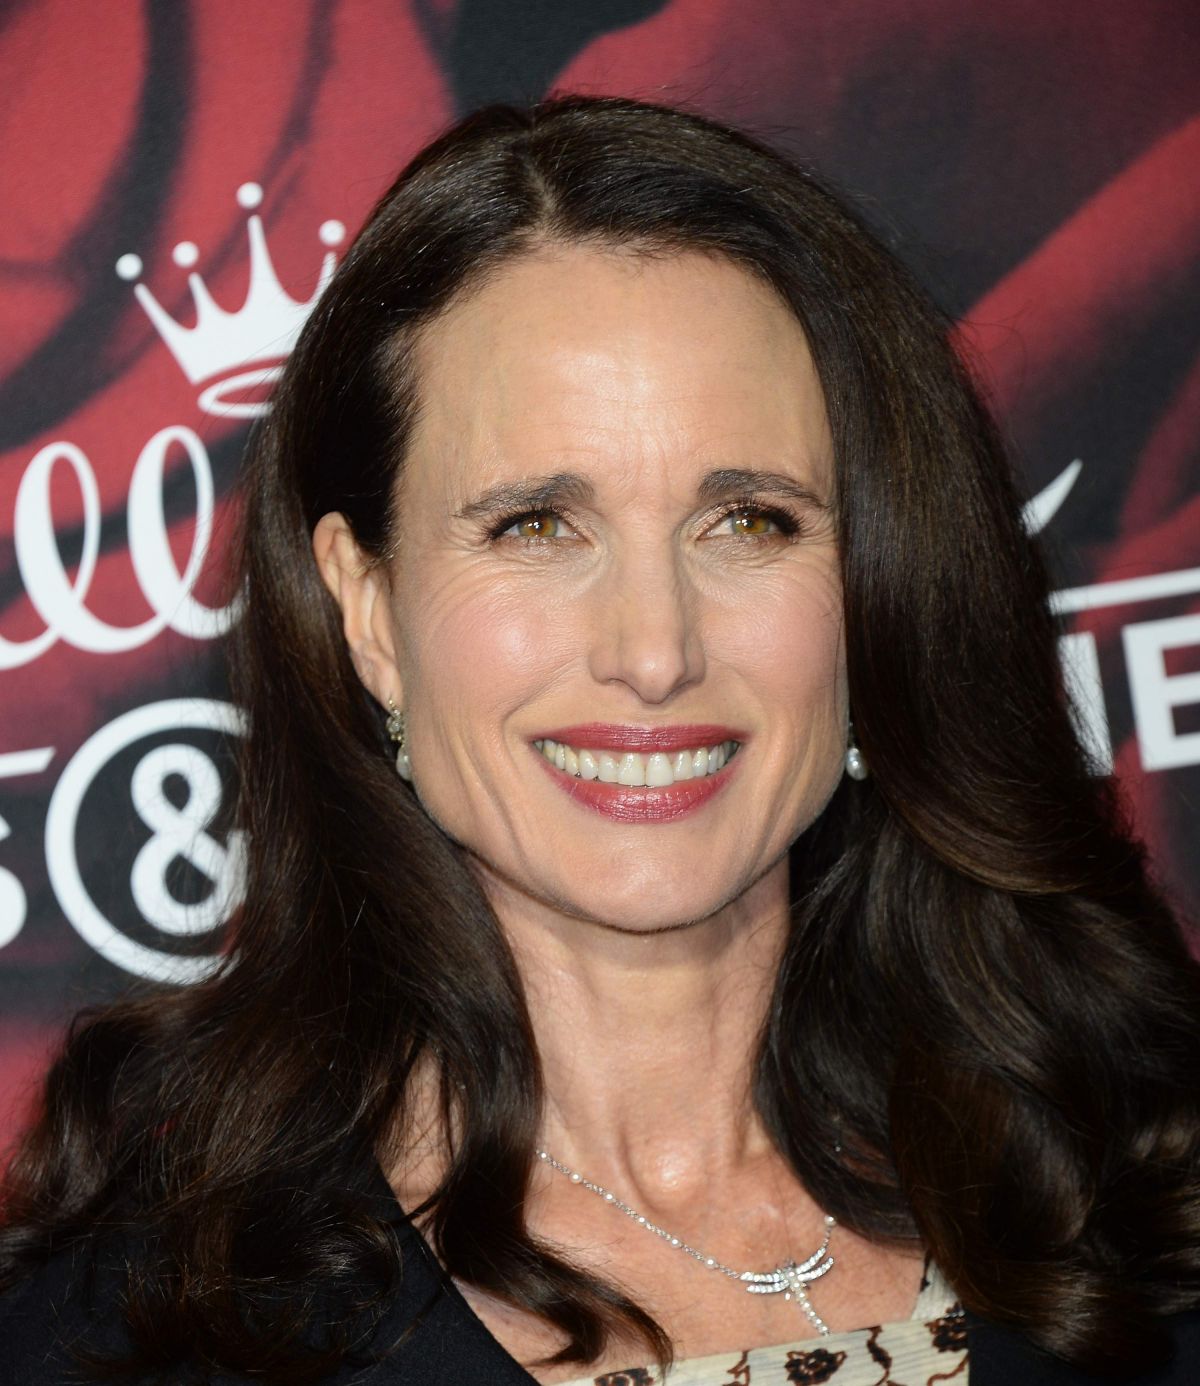 andie-macdowell-at-hallmark-channel-2017-tca-winter-press-tour-in-pasadena-01-14-2017_1